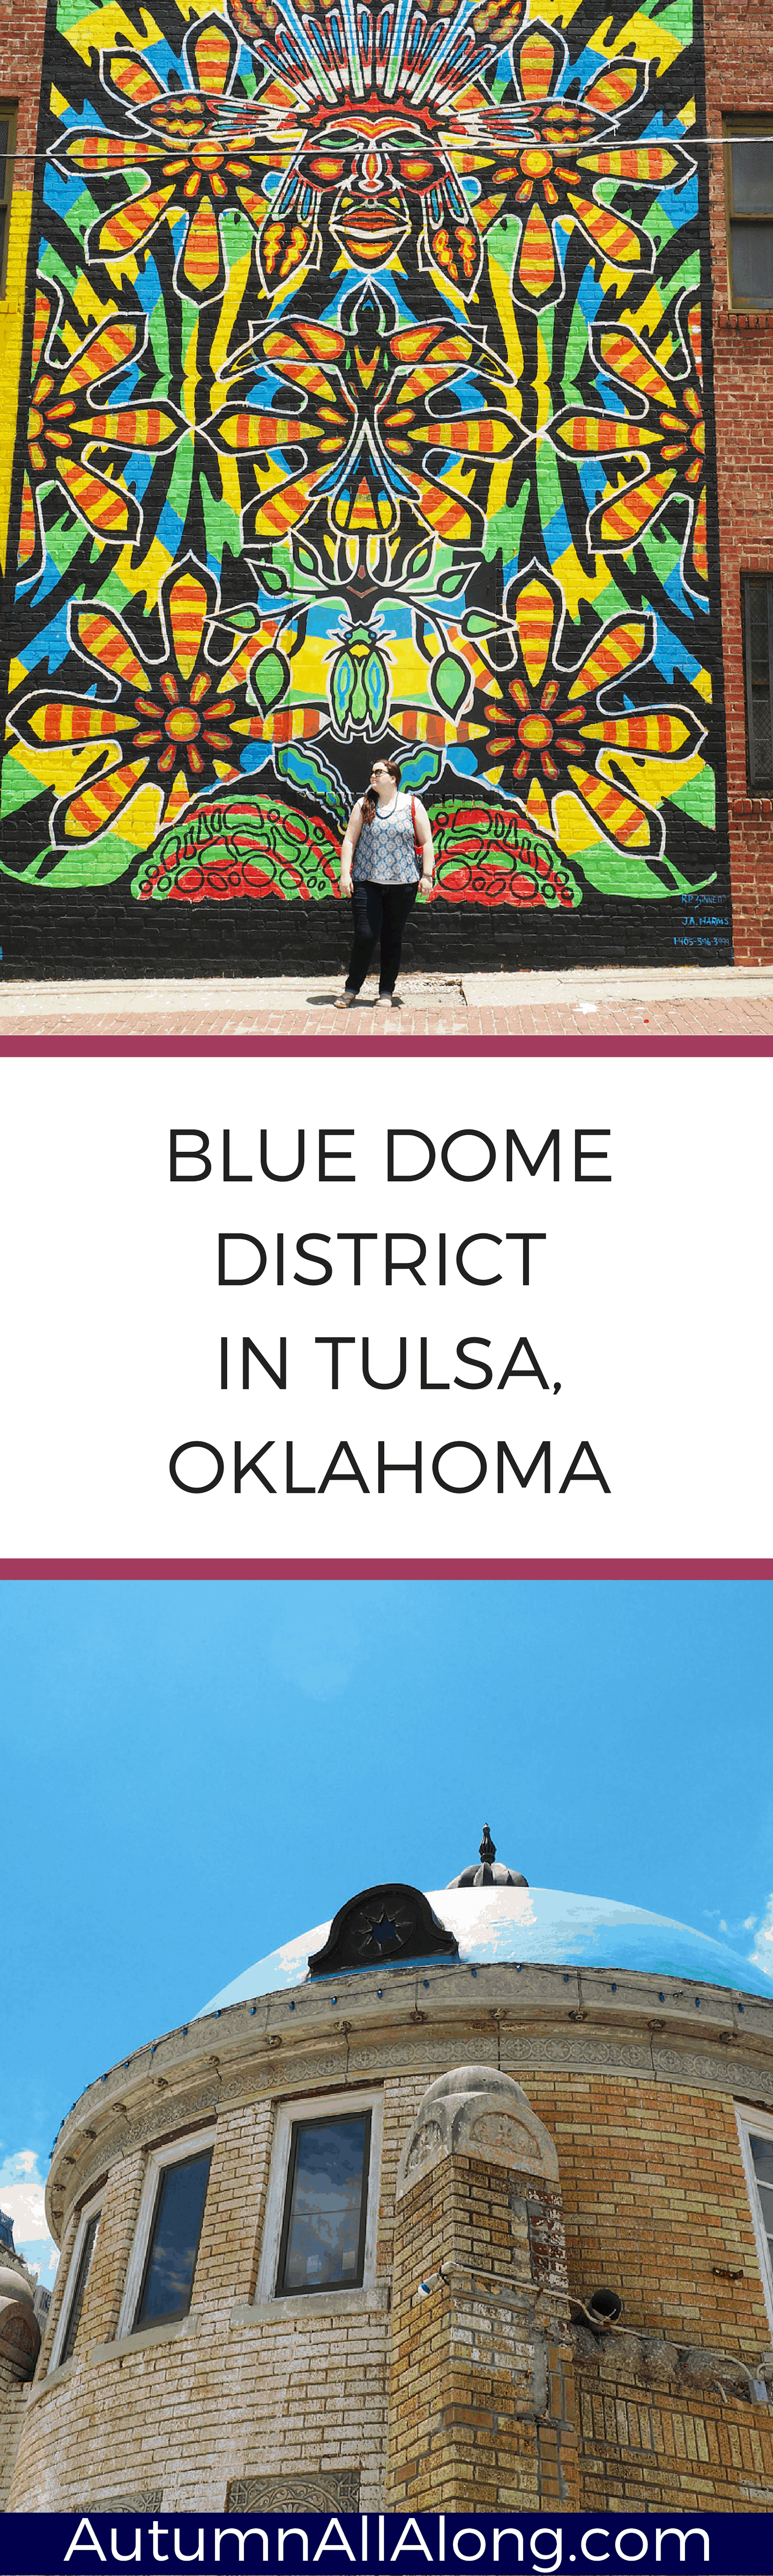 We spent about 24 hours in Tulsa, Oklahoma and now I totally want to go back. The Blue Dome District centers around a route 66 land mark and is a beautiful historic district in Tulsa. We also learned that midwest nice is totally a real thing while visiting! | via Autumn All Along